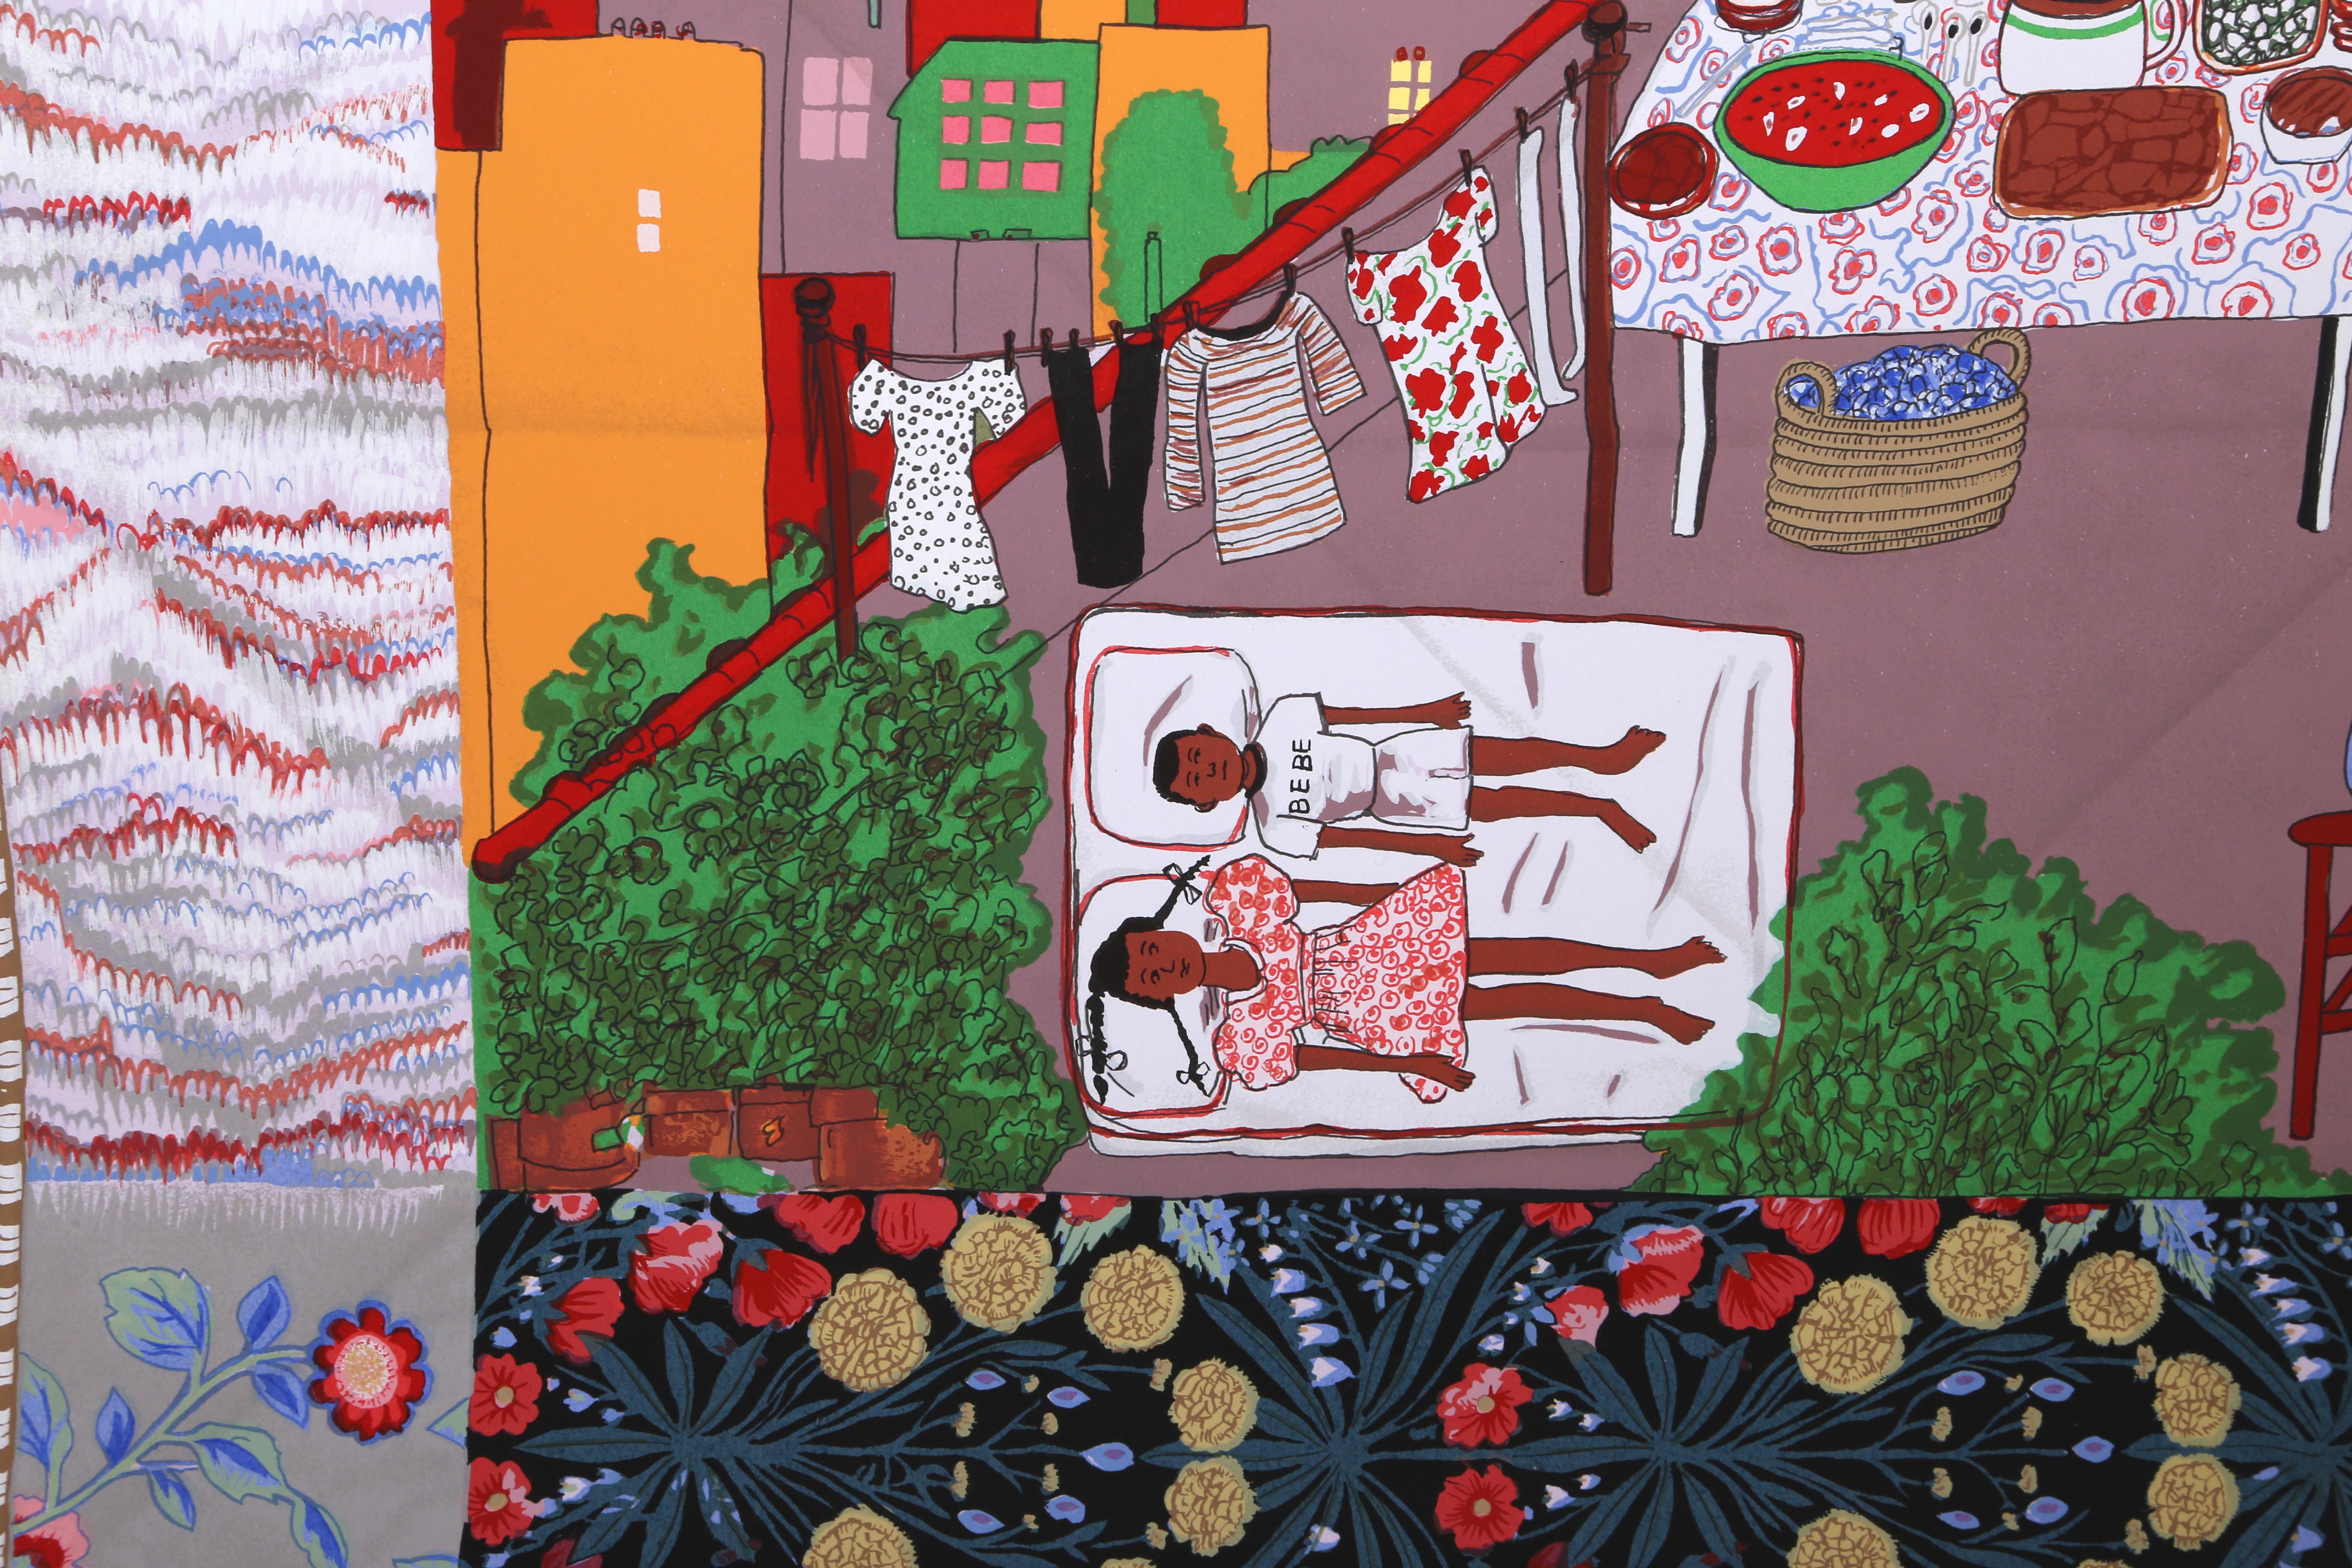 Artist: Faith Ringgold, American (1934 - )
Title: Tar Beach 2
Year: 2003
Medium: Screenprint, signed, numbered, dated, and titled in pencil 
Edition: 195
Image Size: 32.5 x 31.5 inches
Paper Size: 39 x 38 in. (99.06 x 96.52 cm)